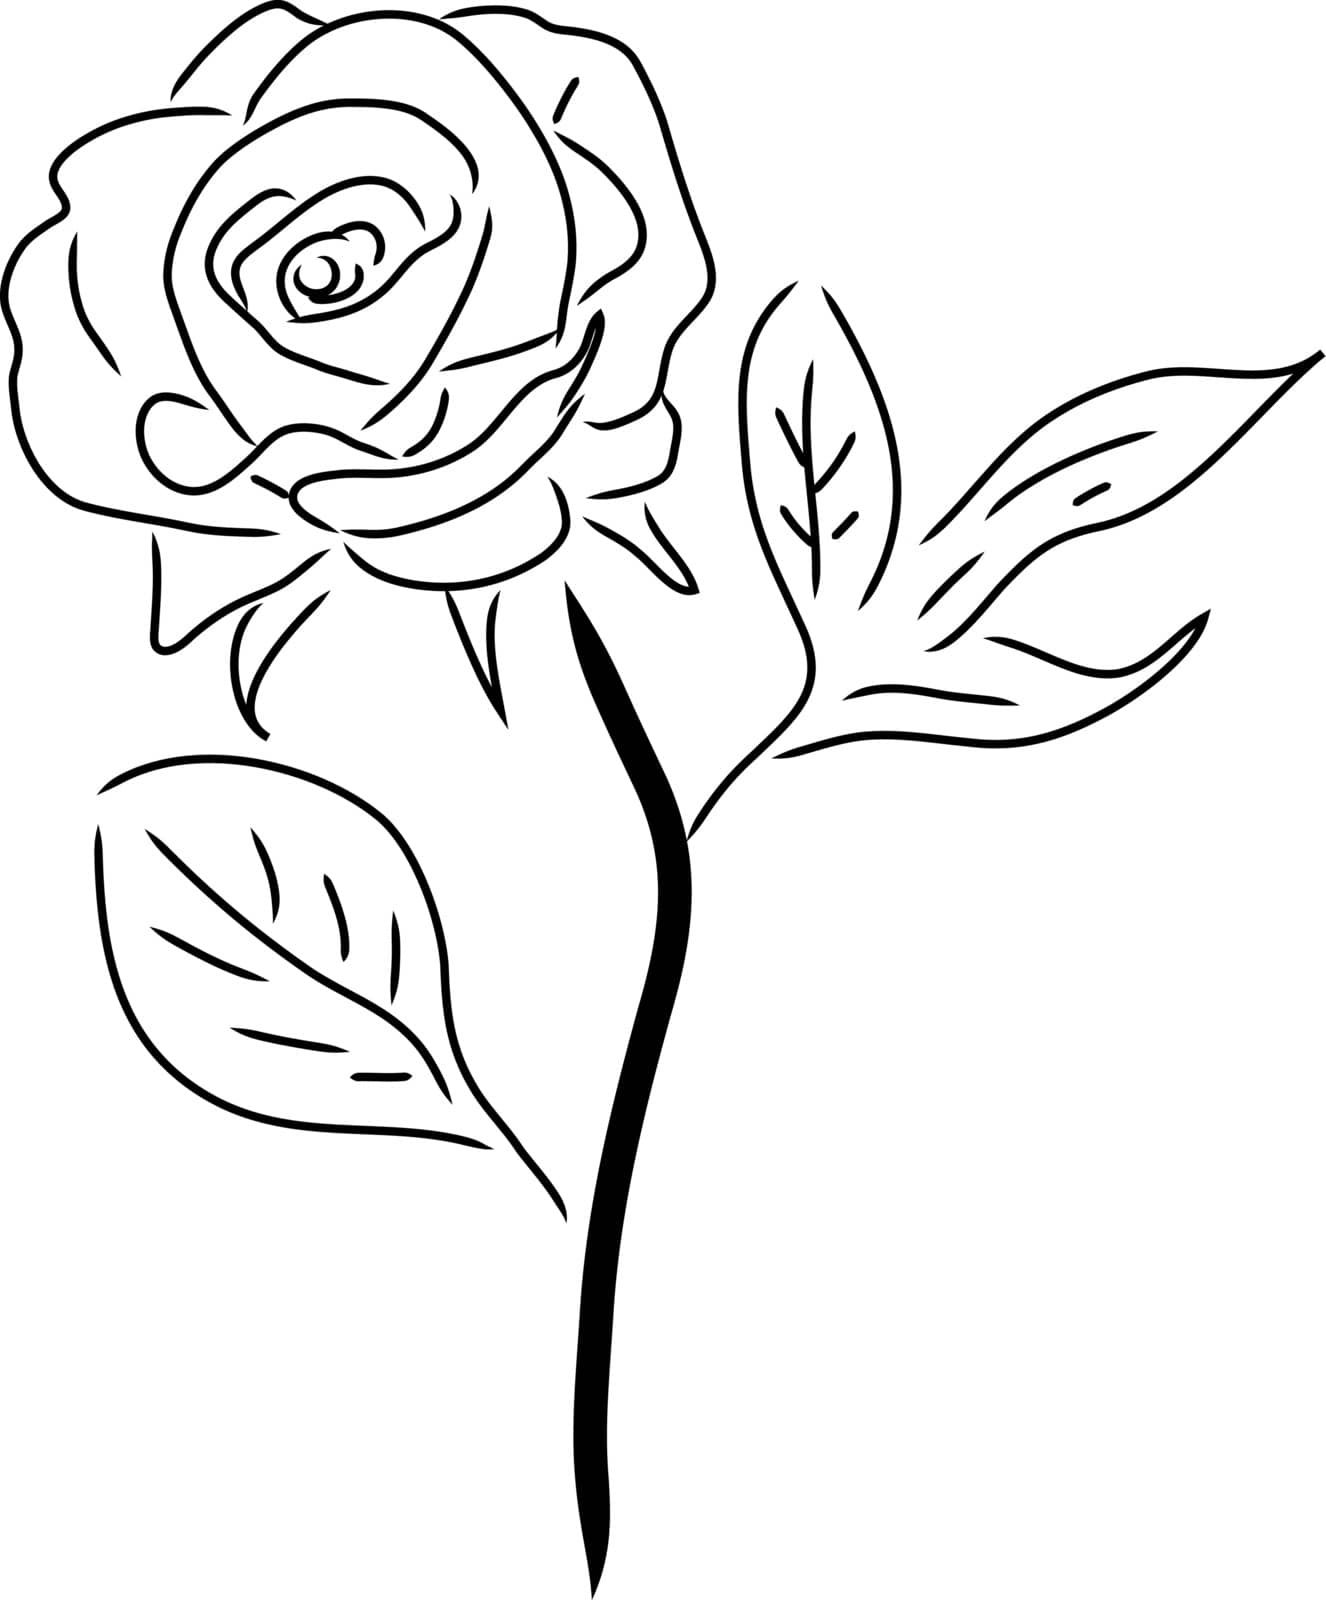 Red Rose isolated on white, vector illustration.